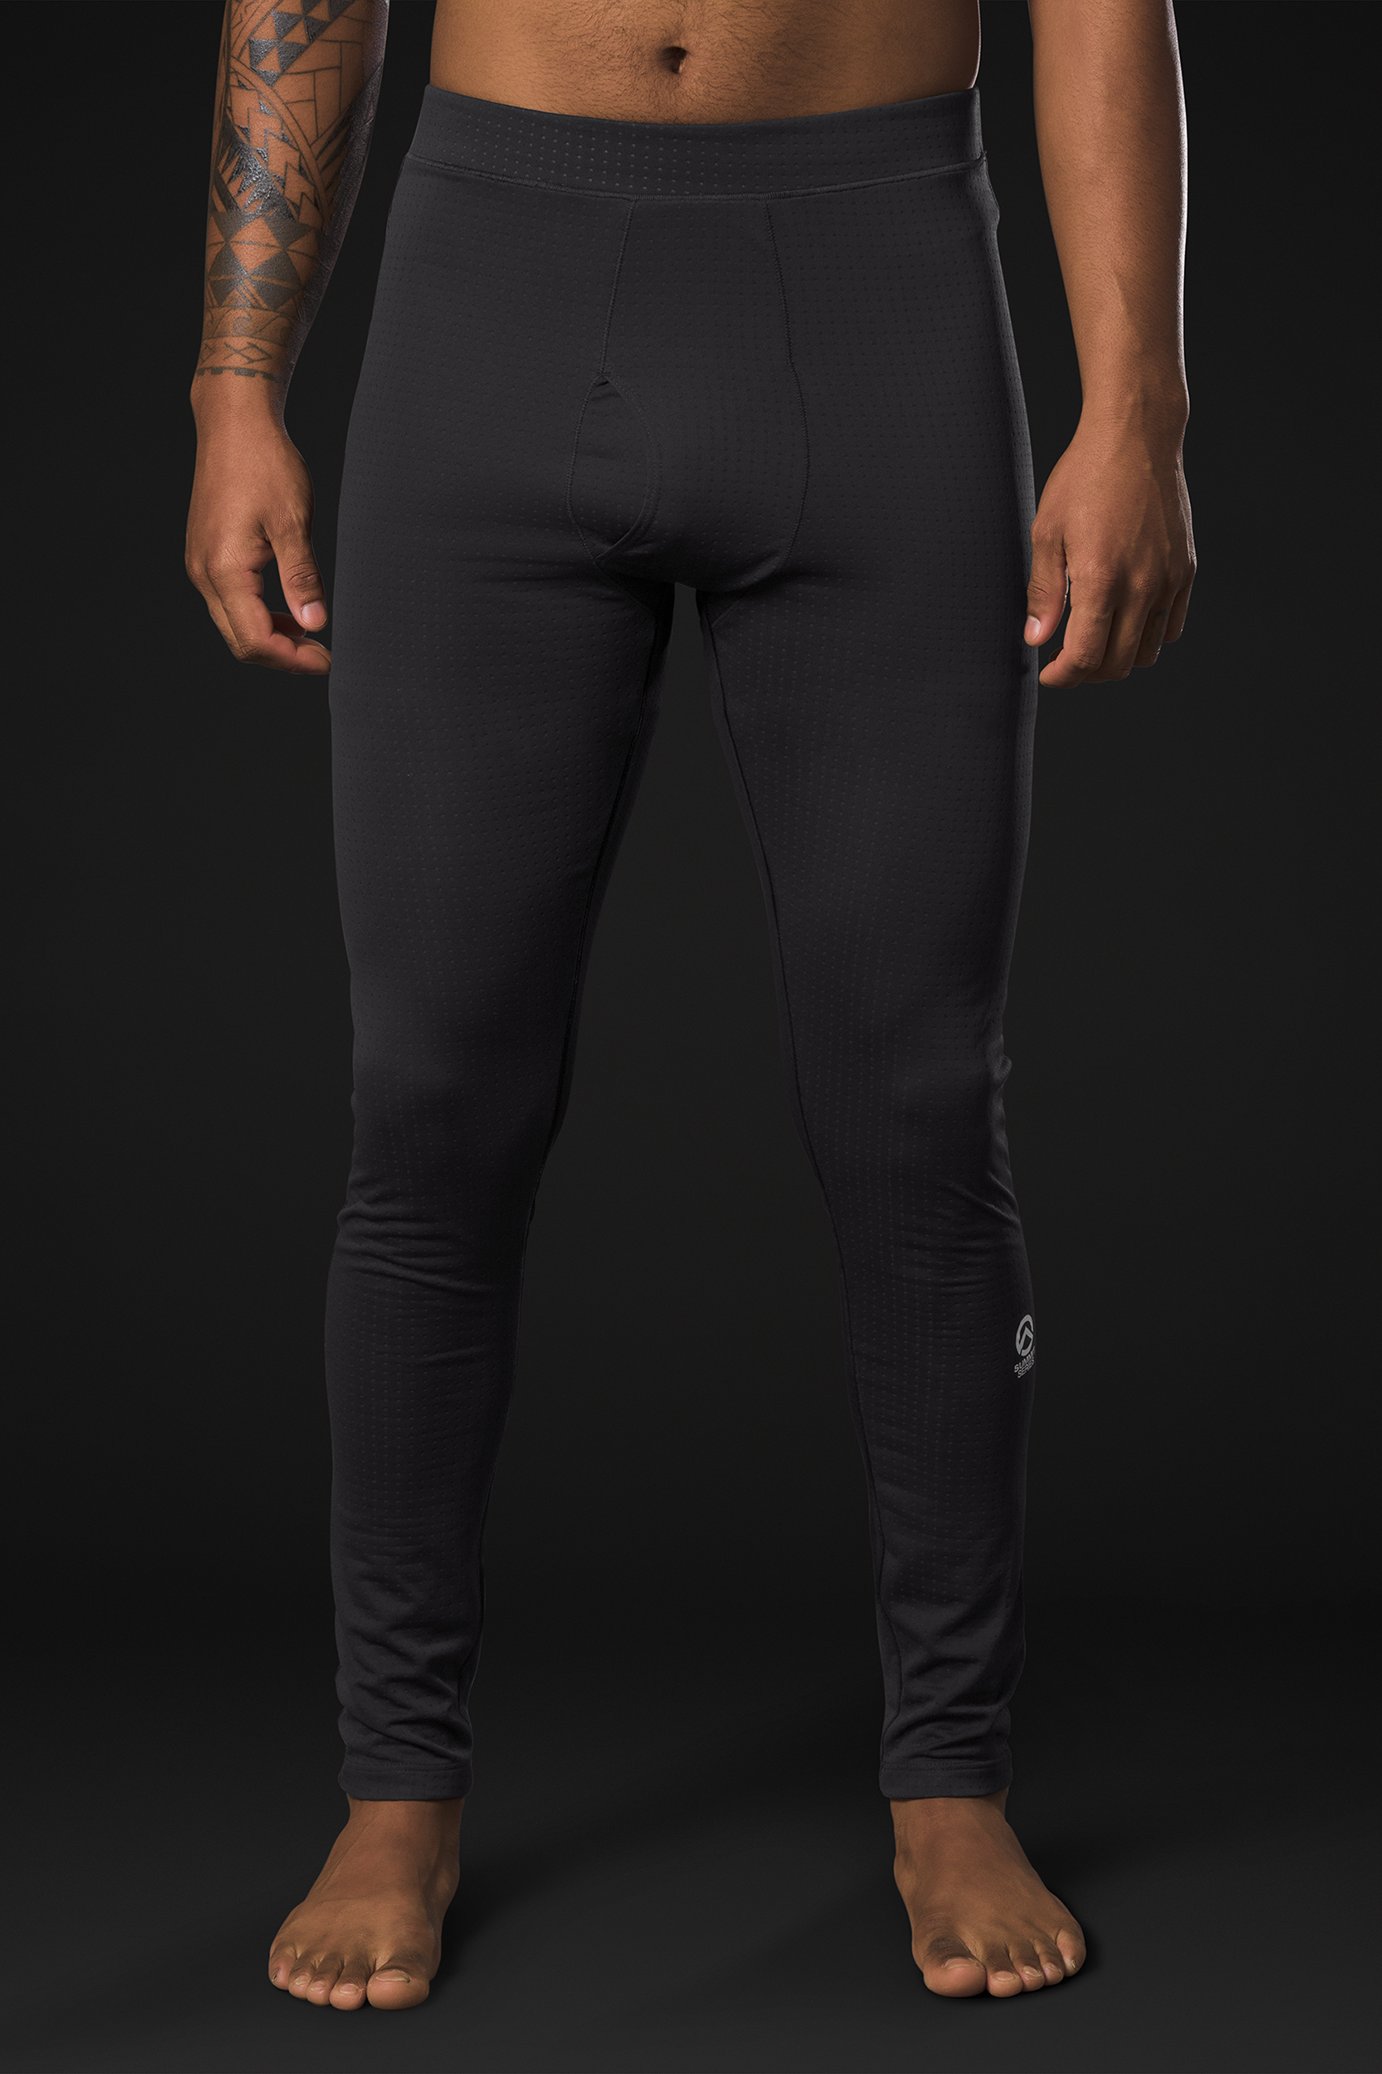 Studio shot of the Men’s DotKnit Tights from The North Face.